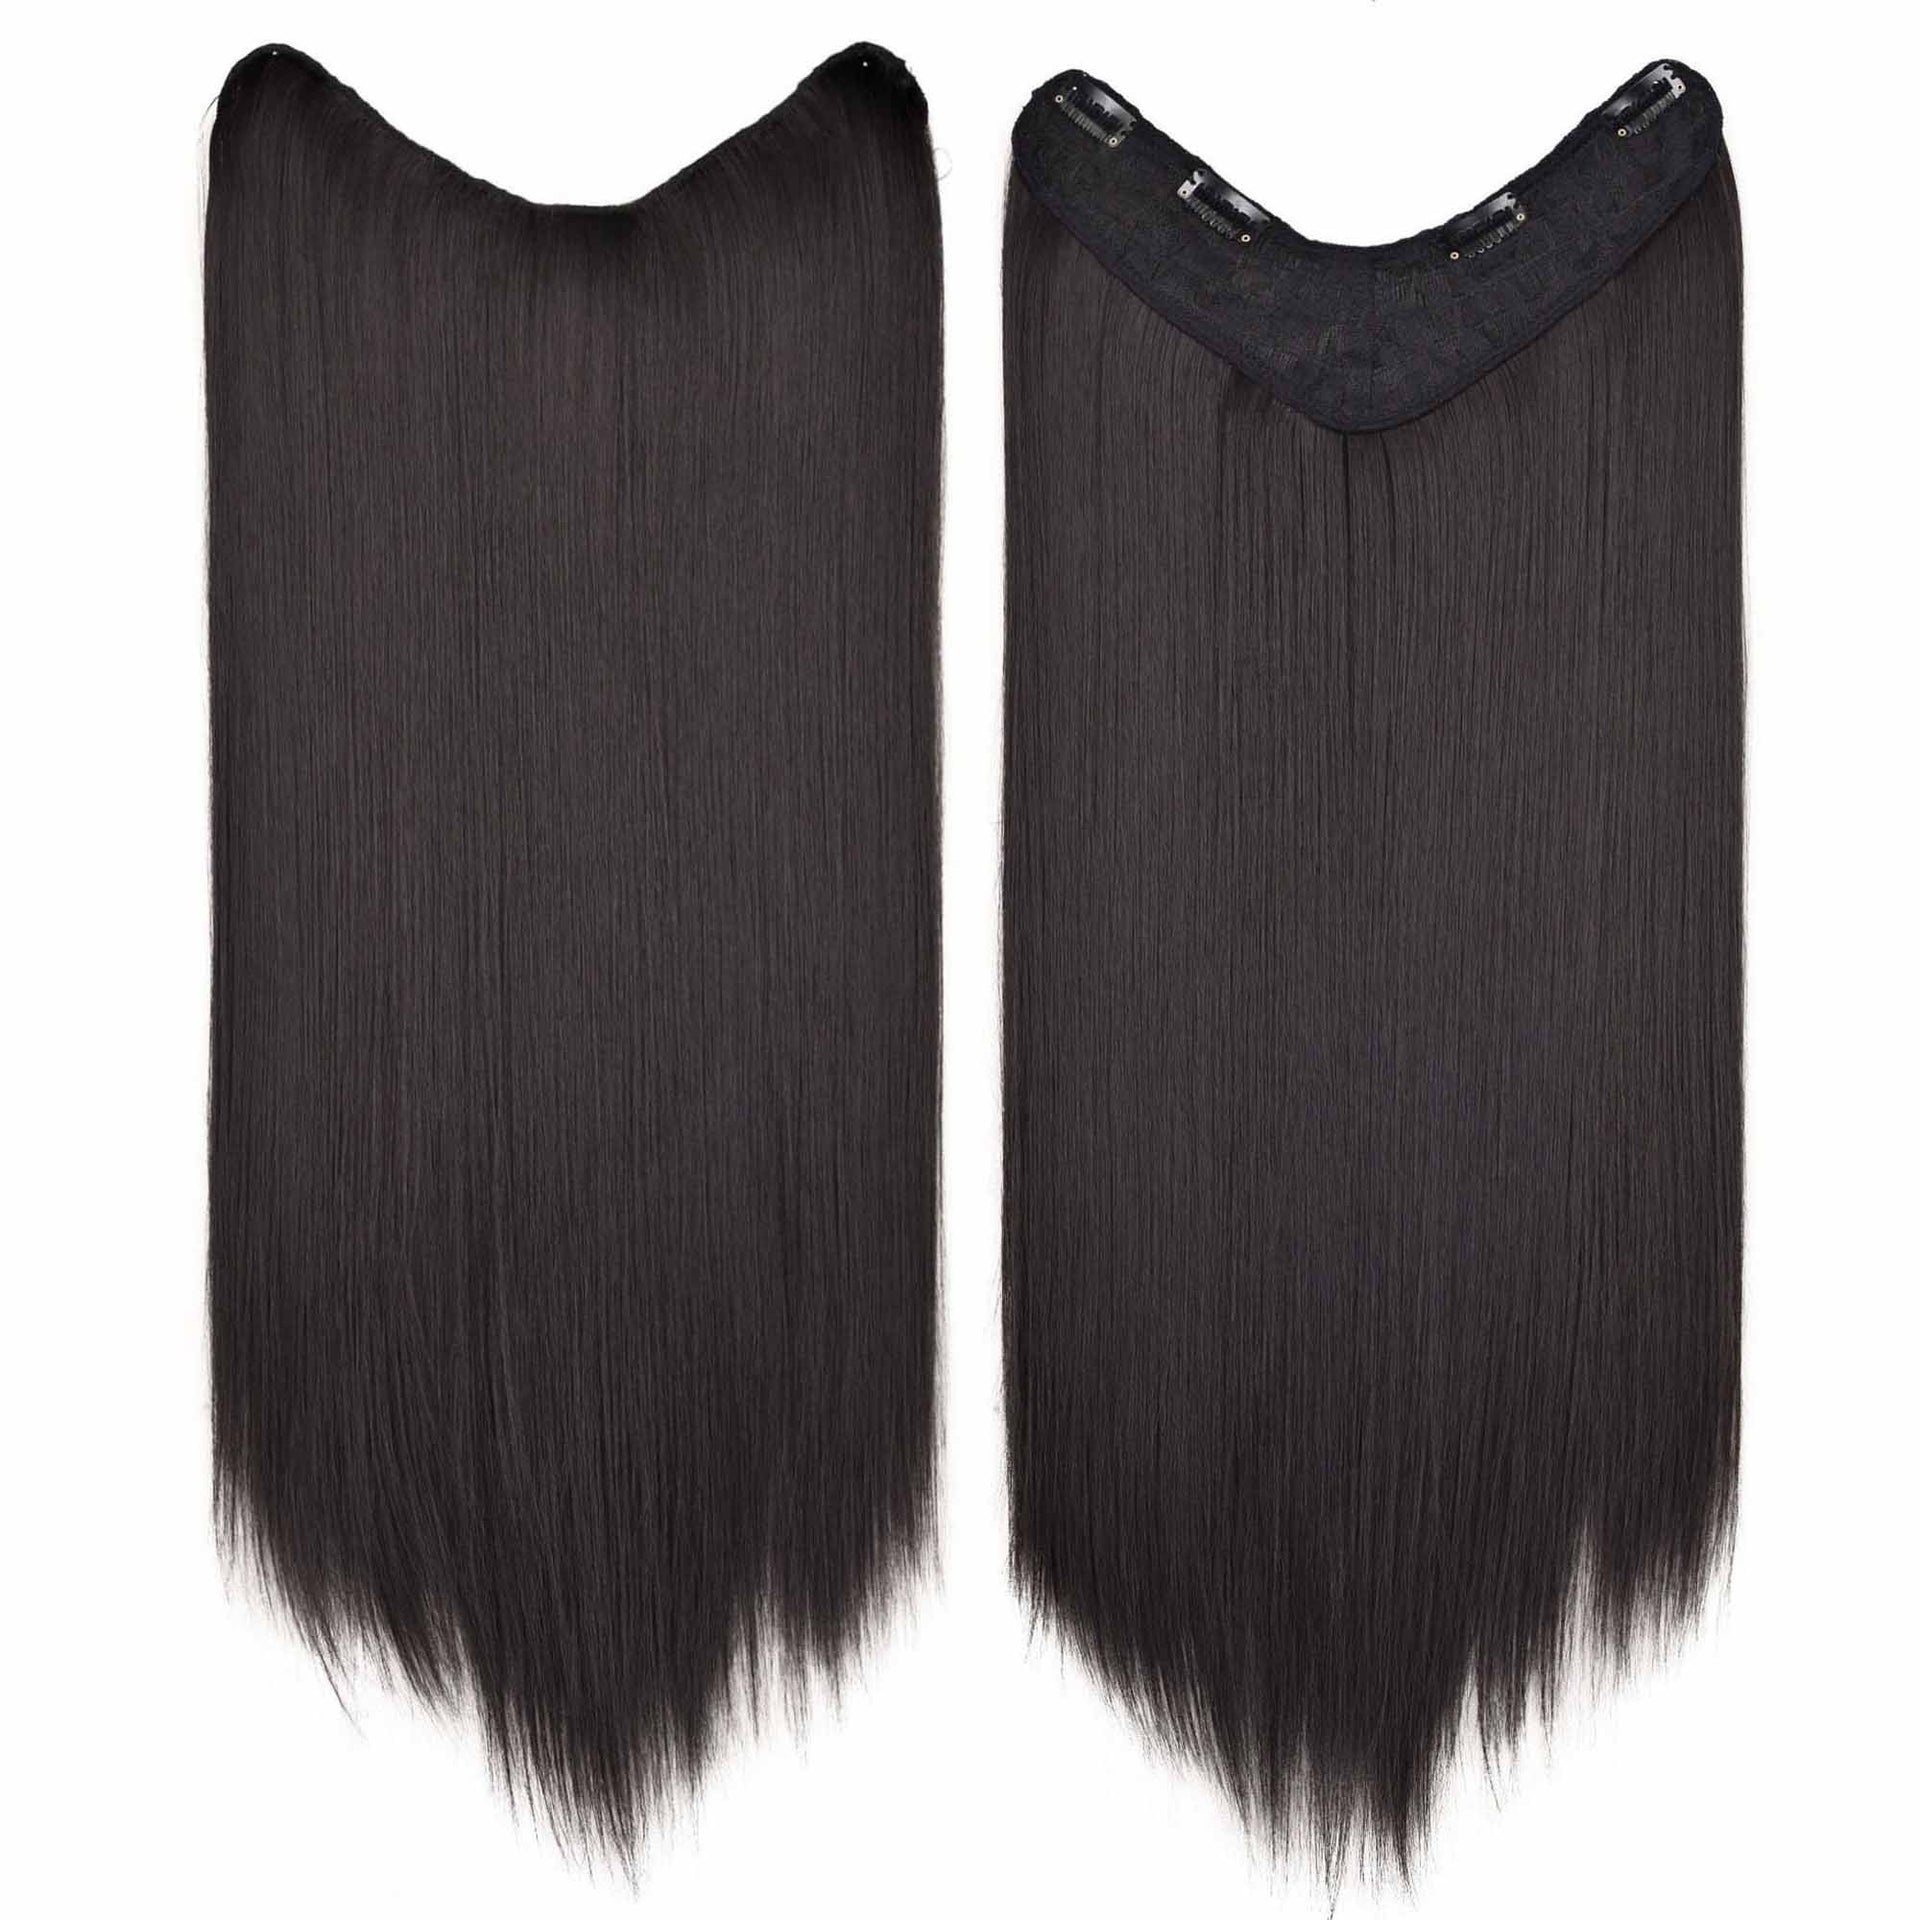 nevermindyrhead Women Black Brown U Part Clip In Synthetic Straight Hair Hair Extensions Black